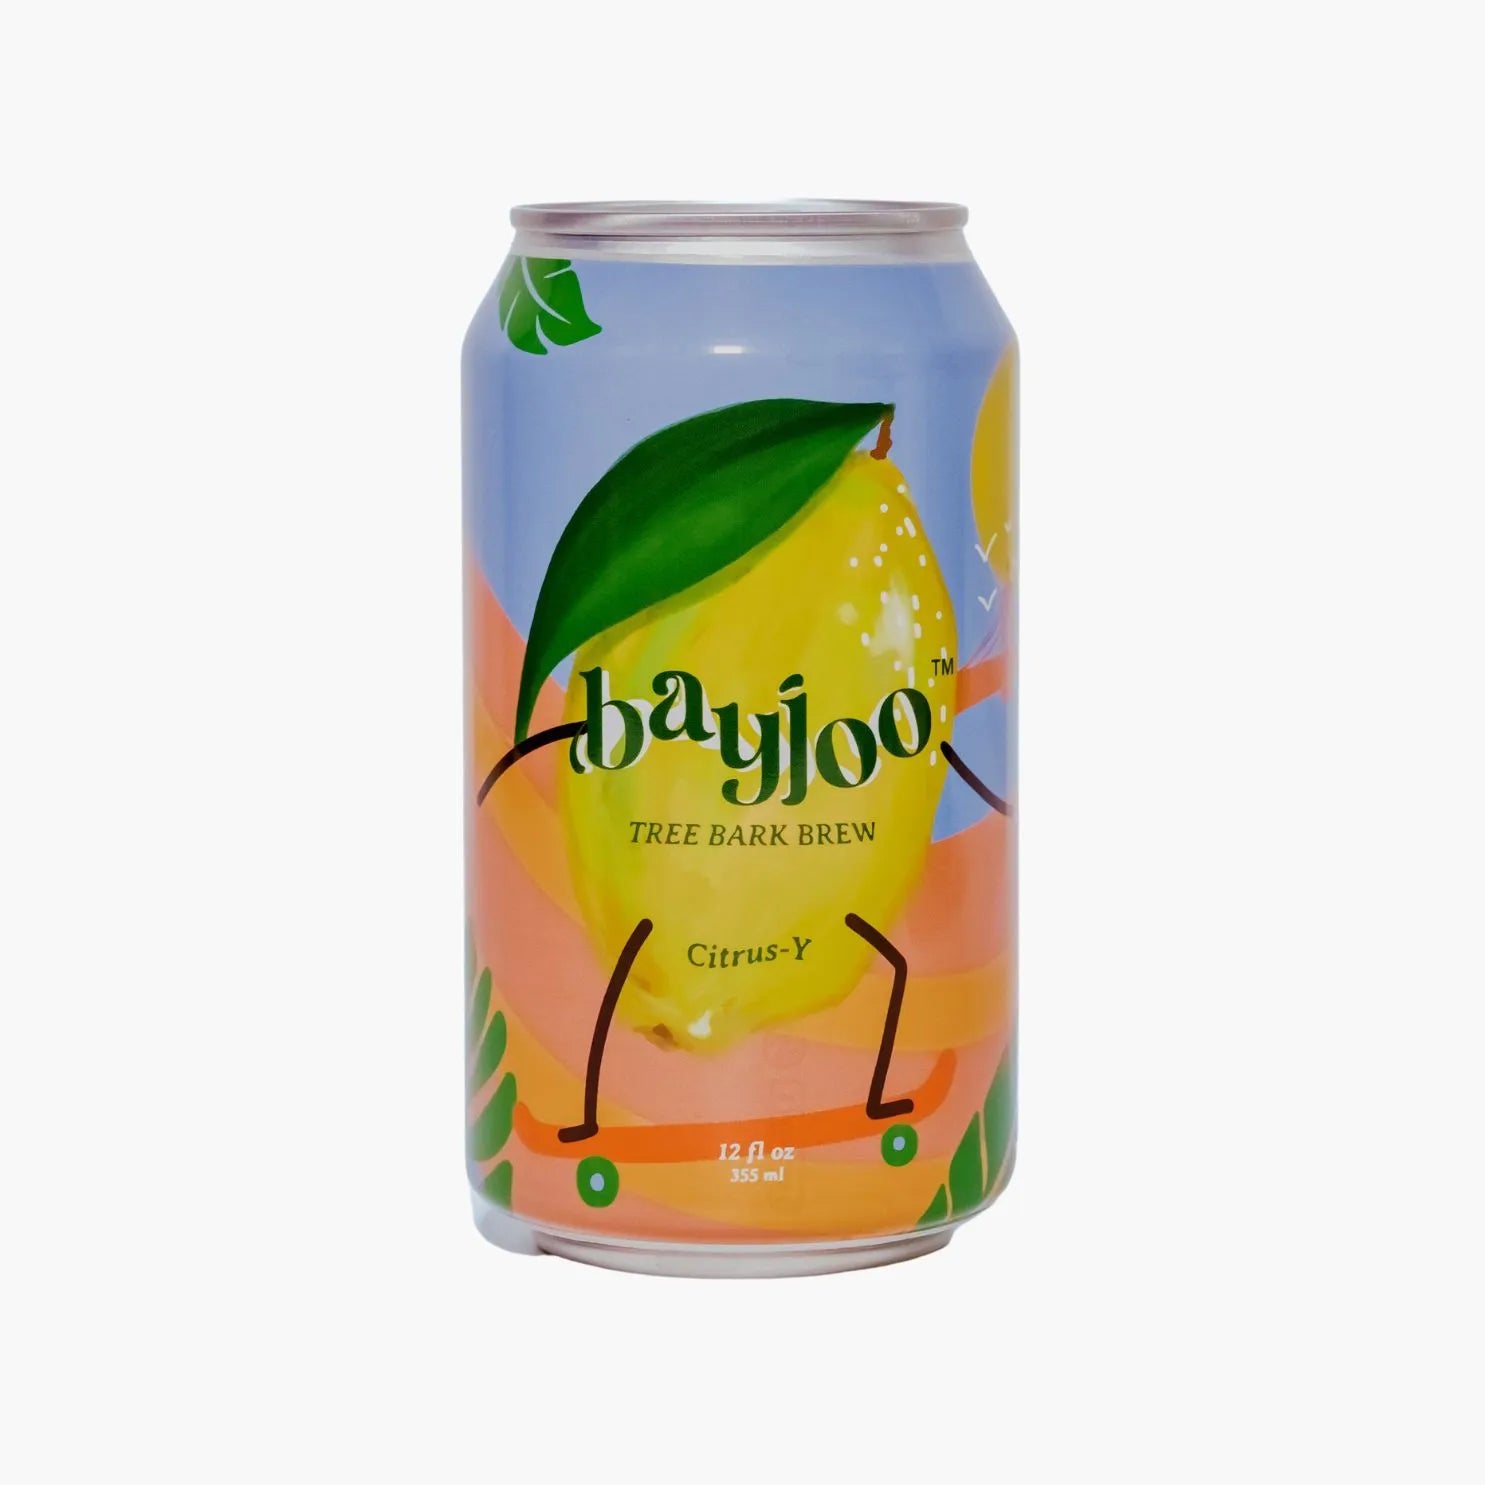 a can of bayjoo tree bark brew citrus y. the illustration is of a lemon riding a skateboard